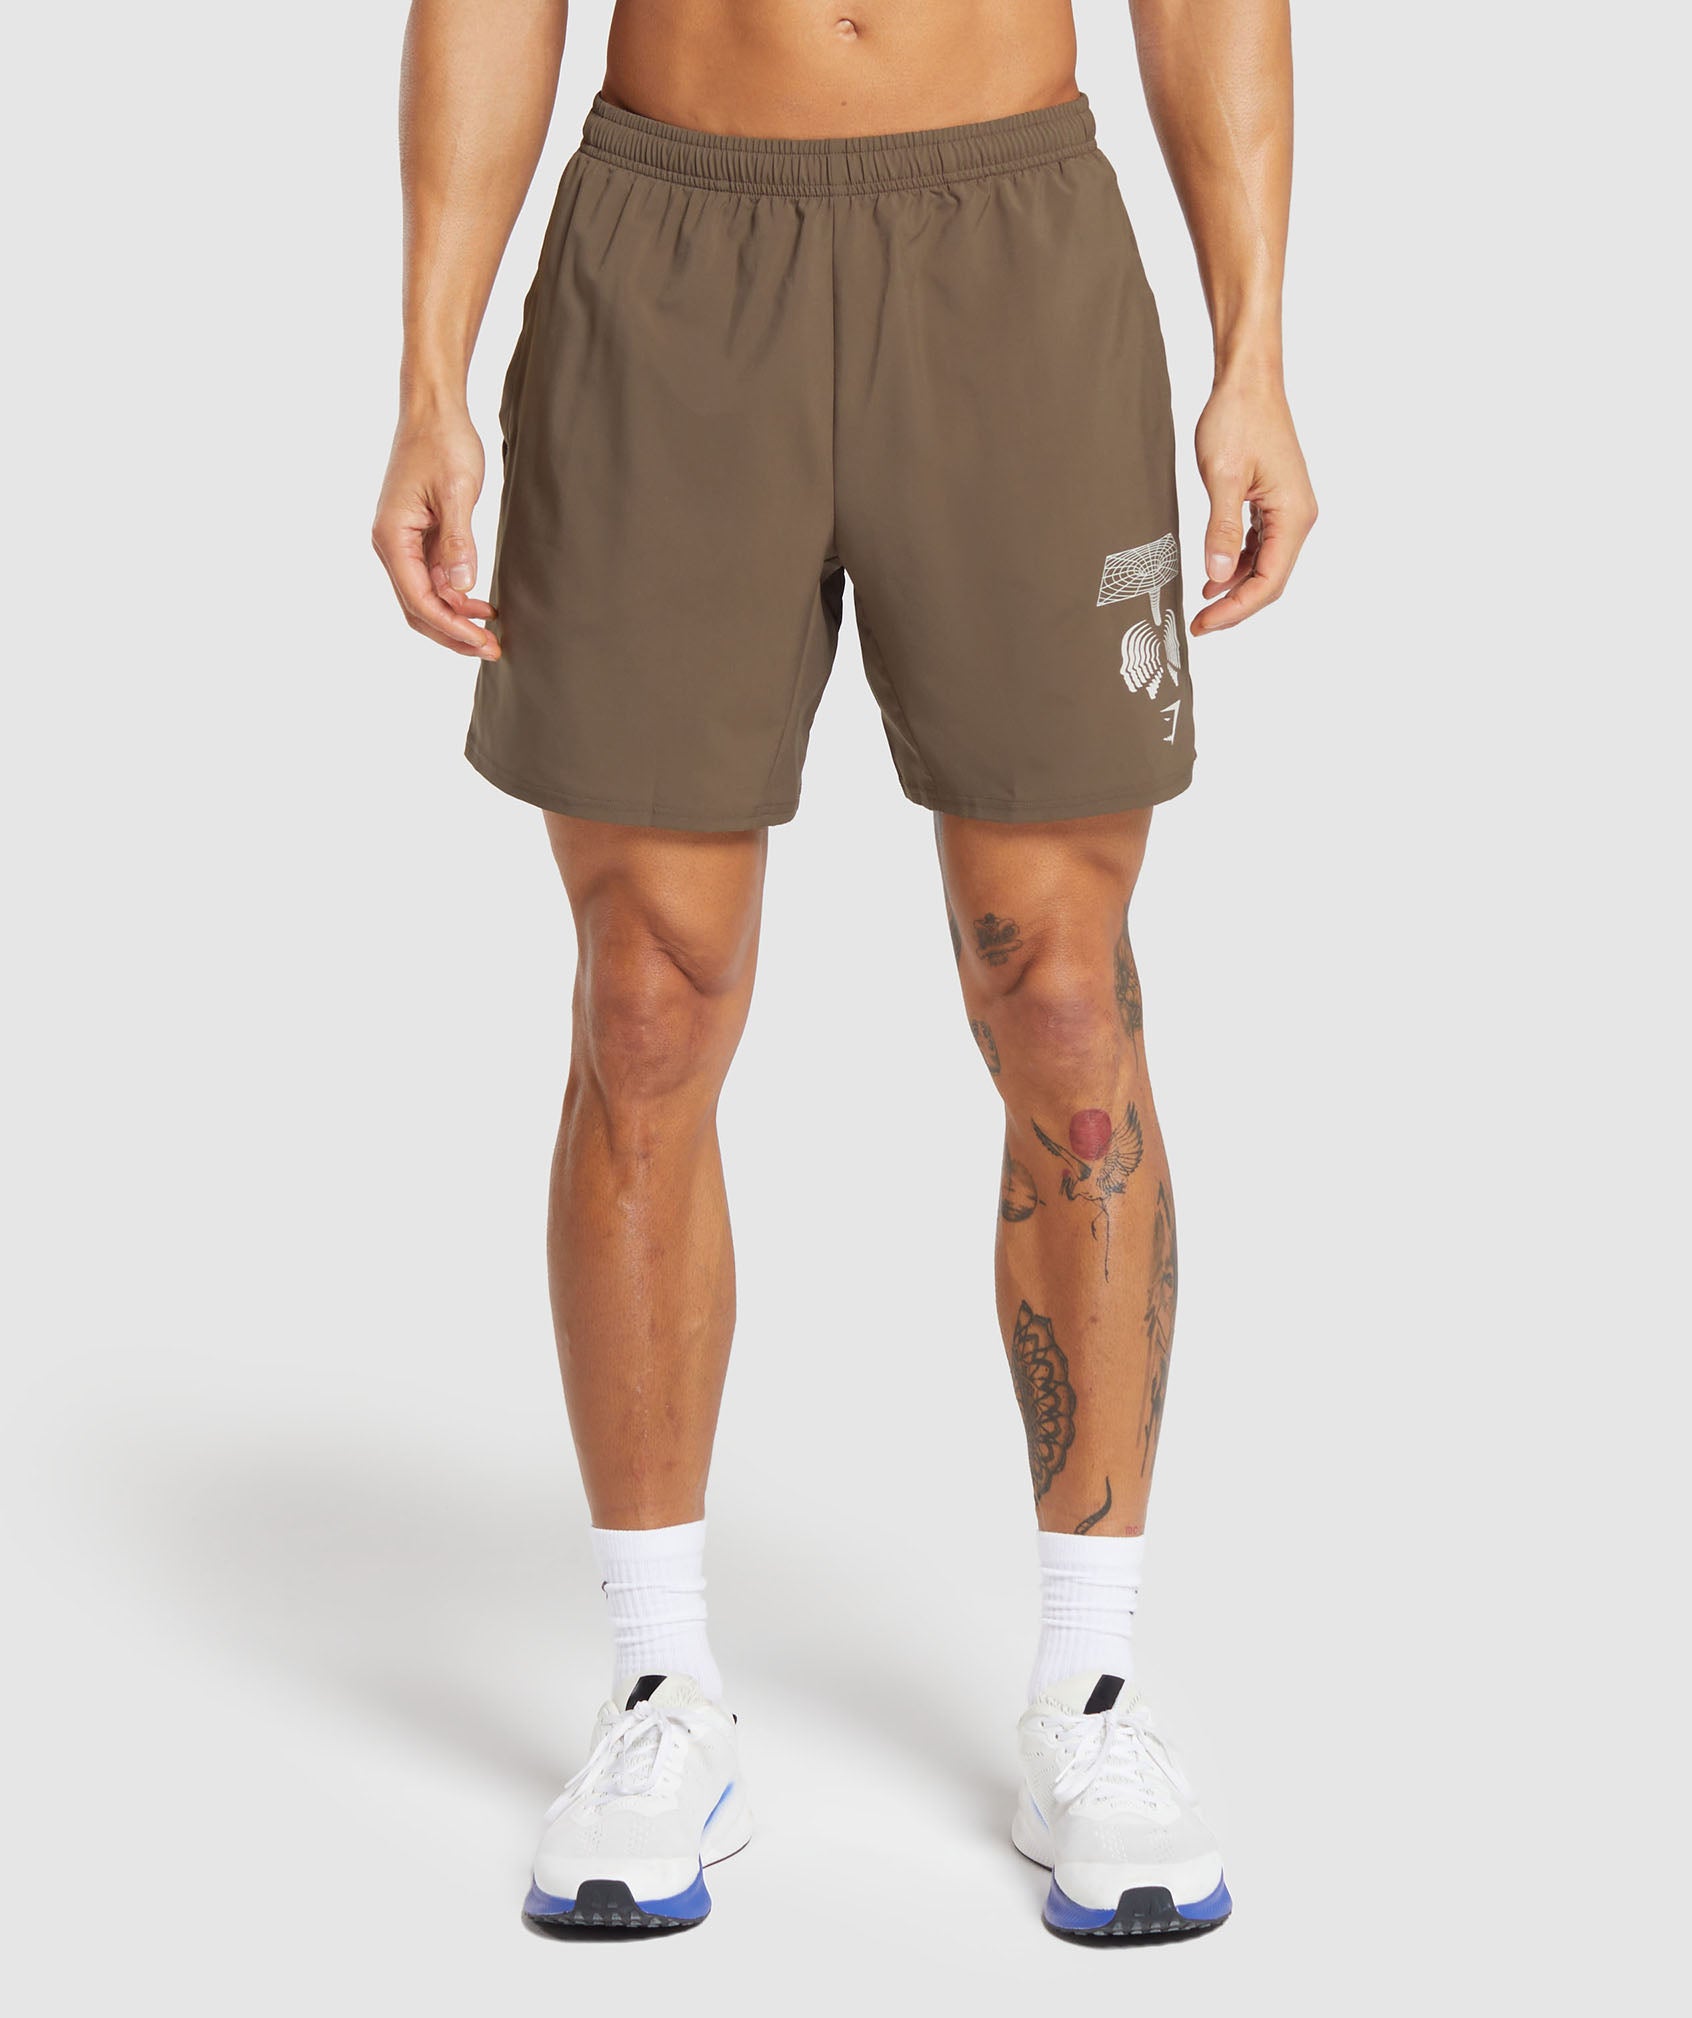 Hybrid Wellness 7" Shorts in Penny Brown